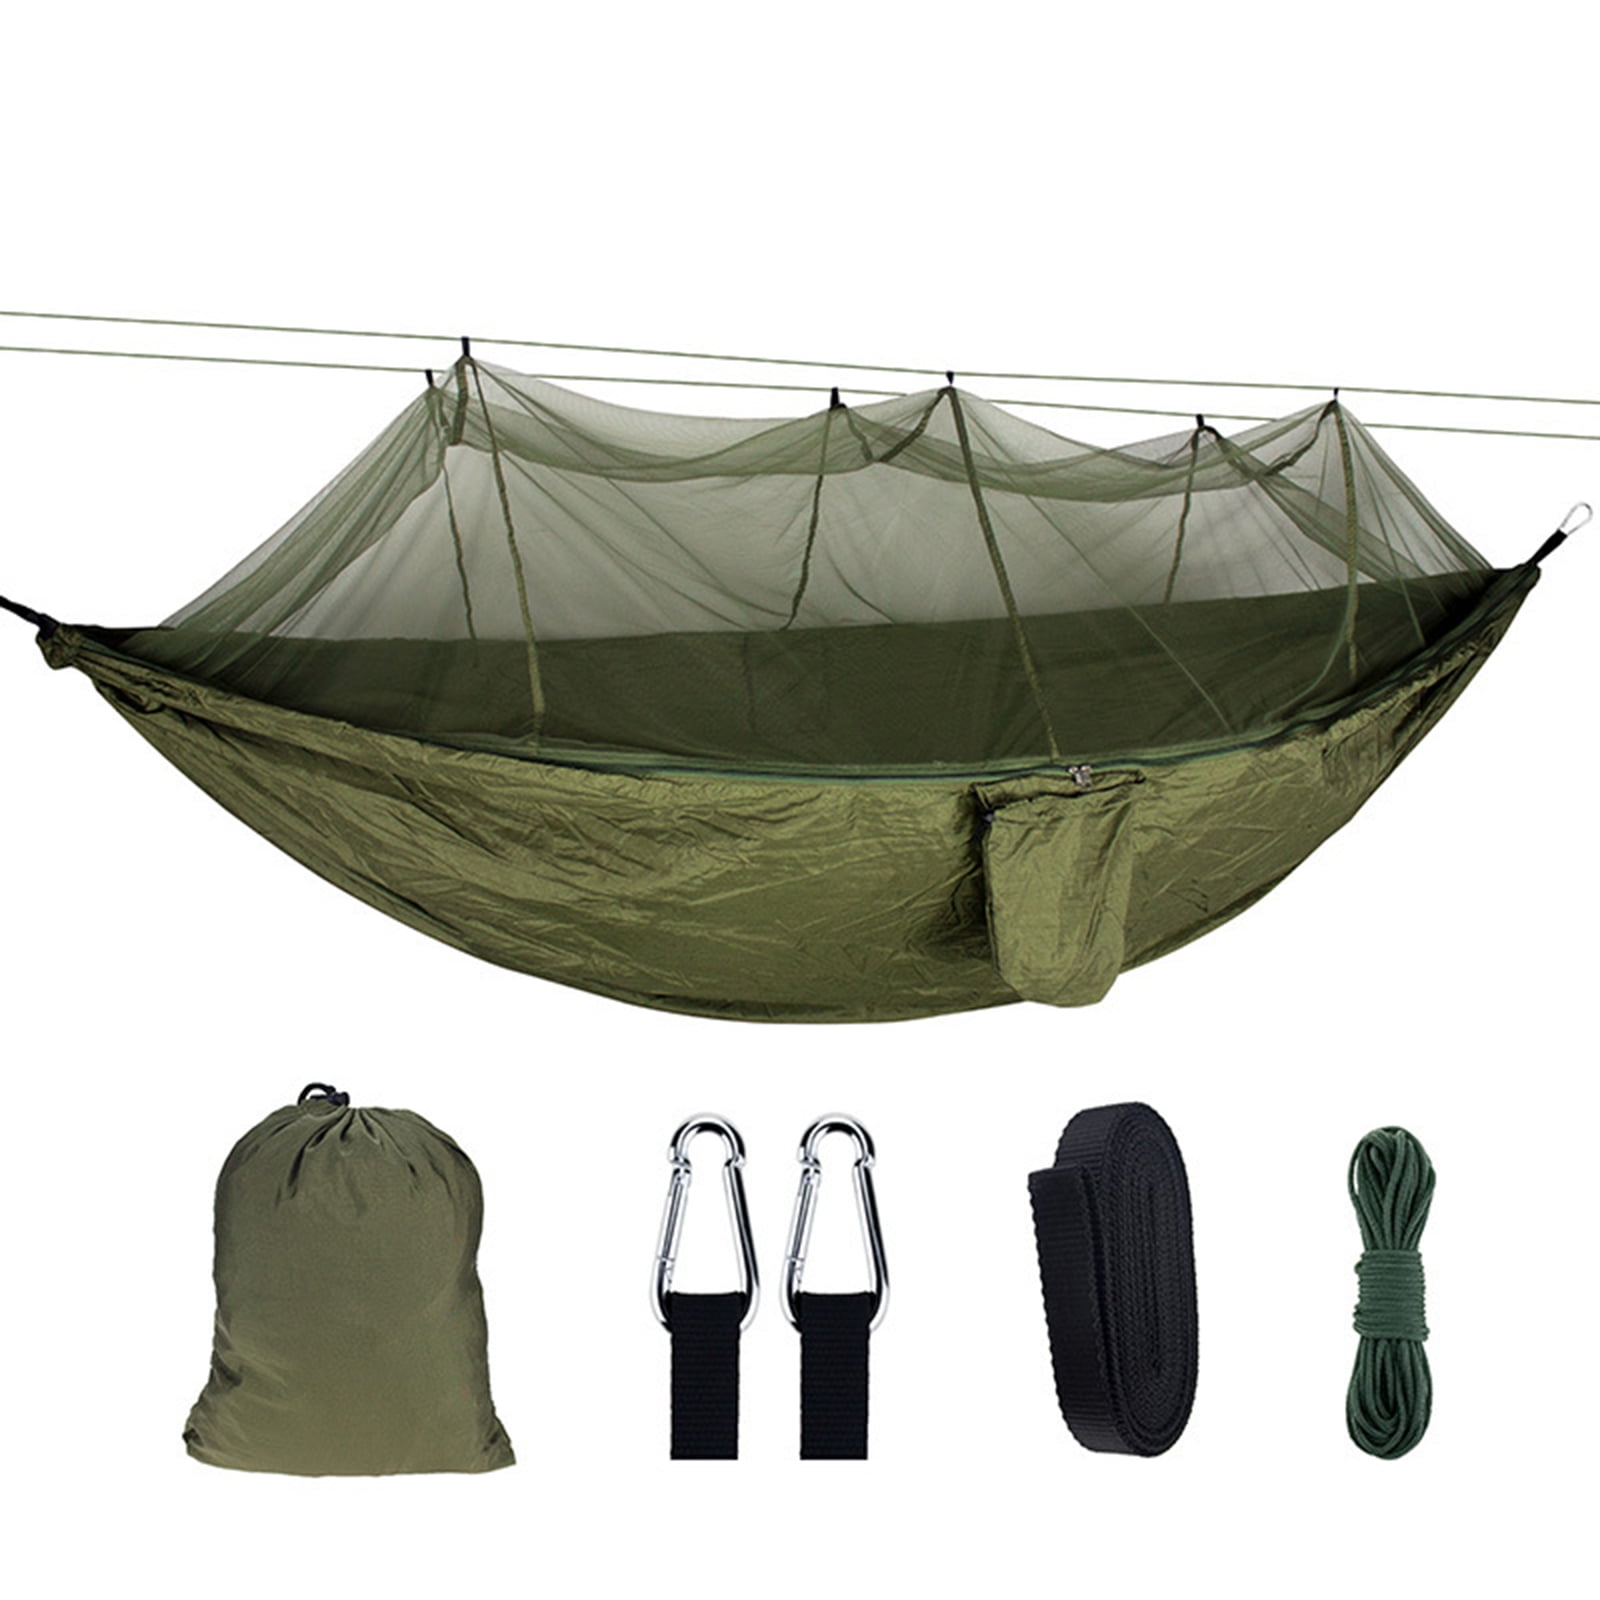 Double Person Hanging Hammock Travel Outdoor Camping Tent Swing Bed Mosquito Net 